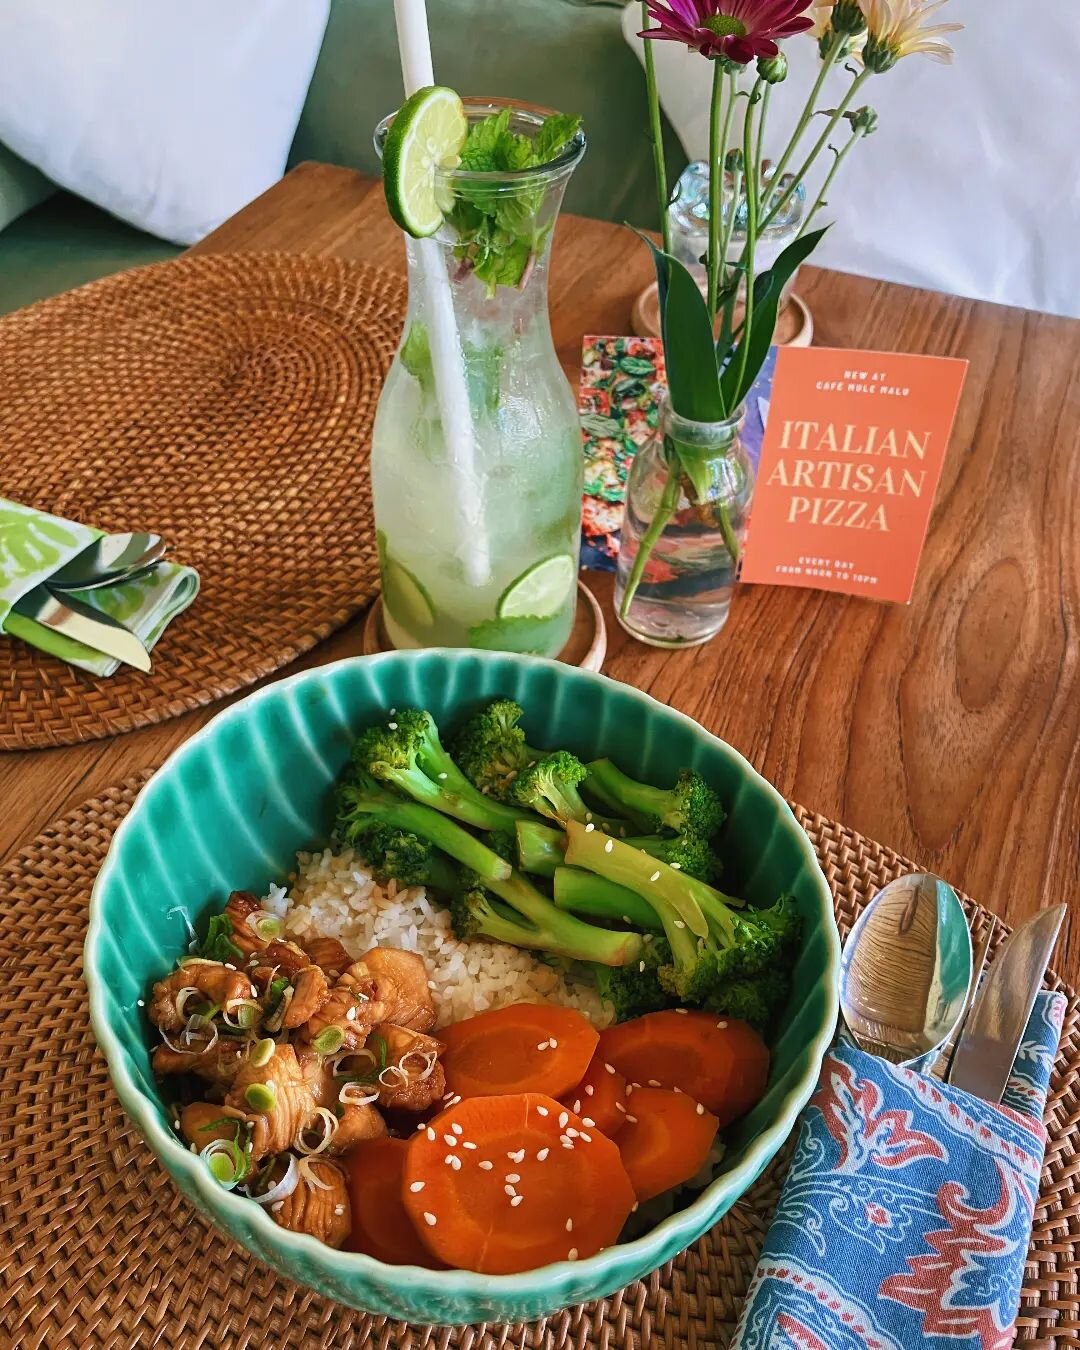 Light lunch with a Teriyaki Chicken bowl 😋 and our guest fav Limeade.

#mulemalu #staytropical #lunch #healthyfood